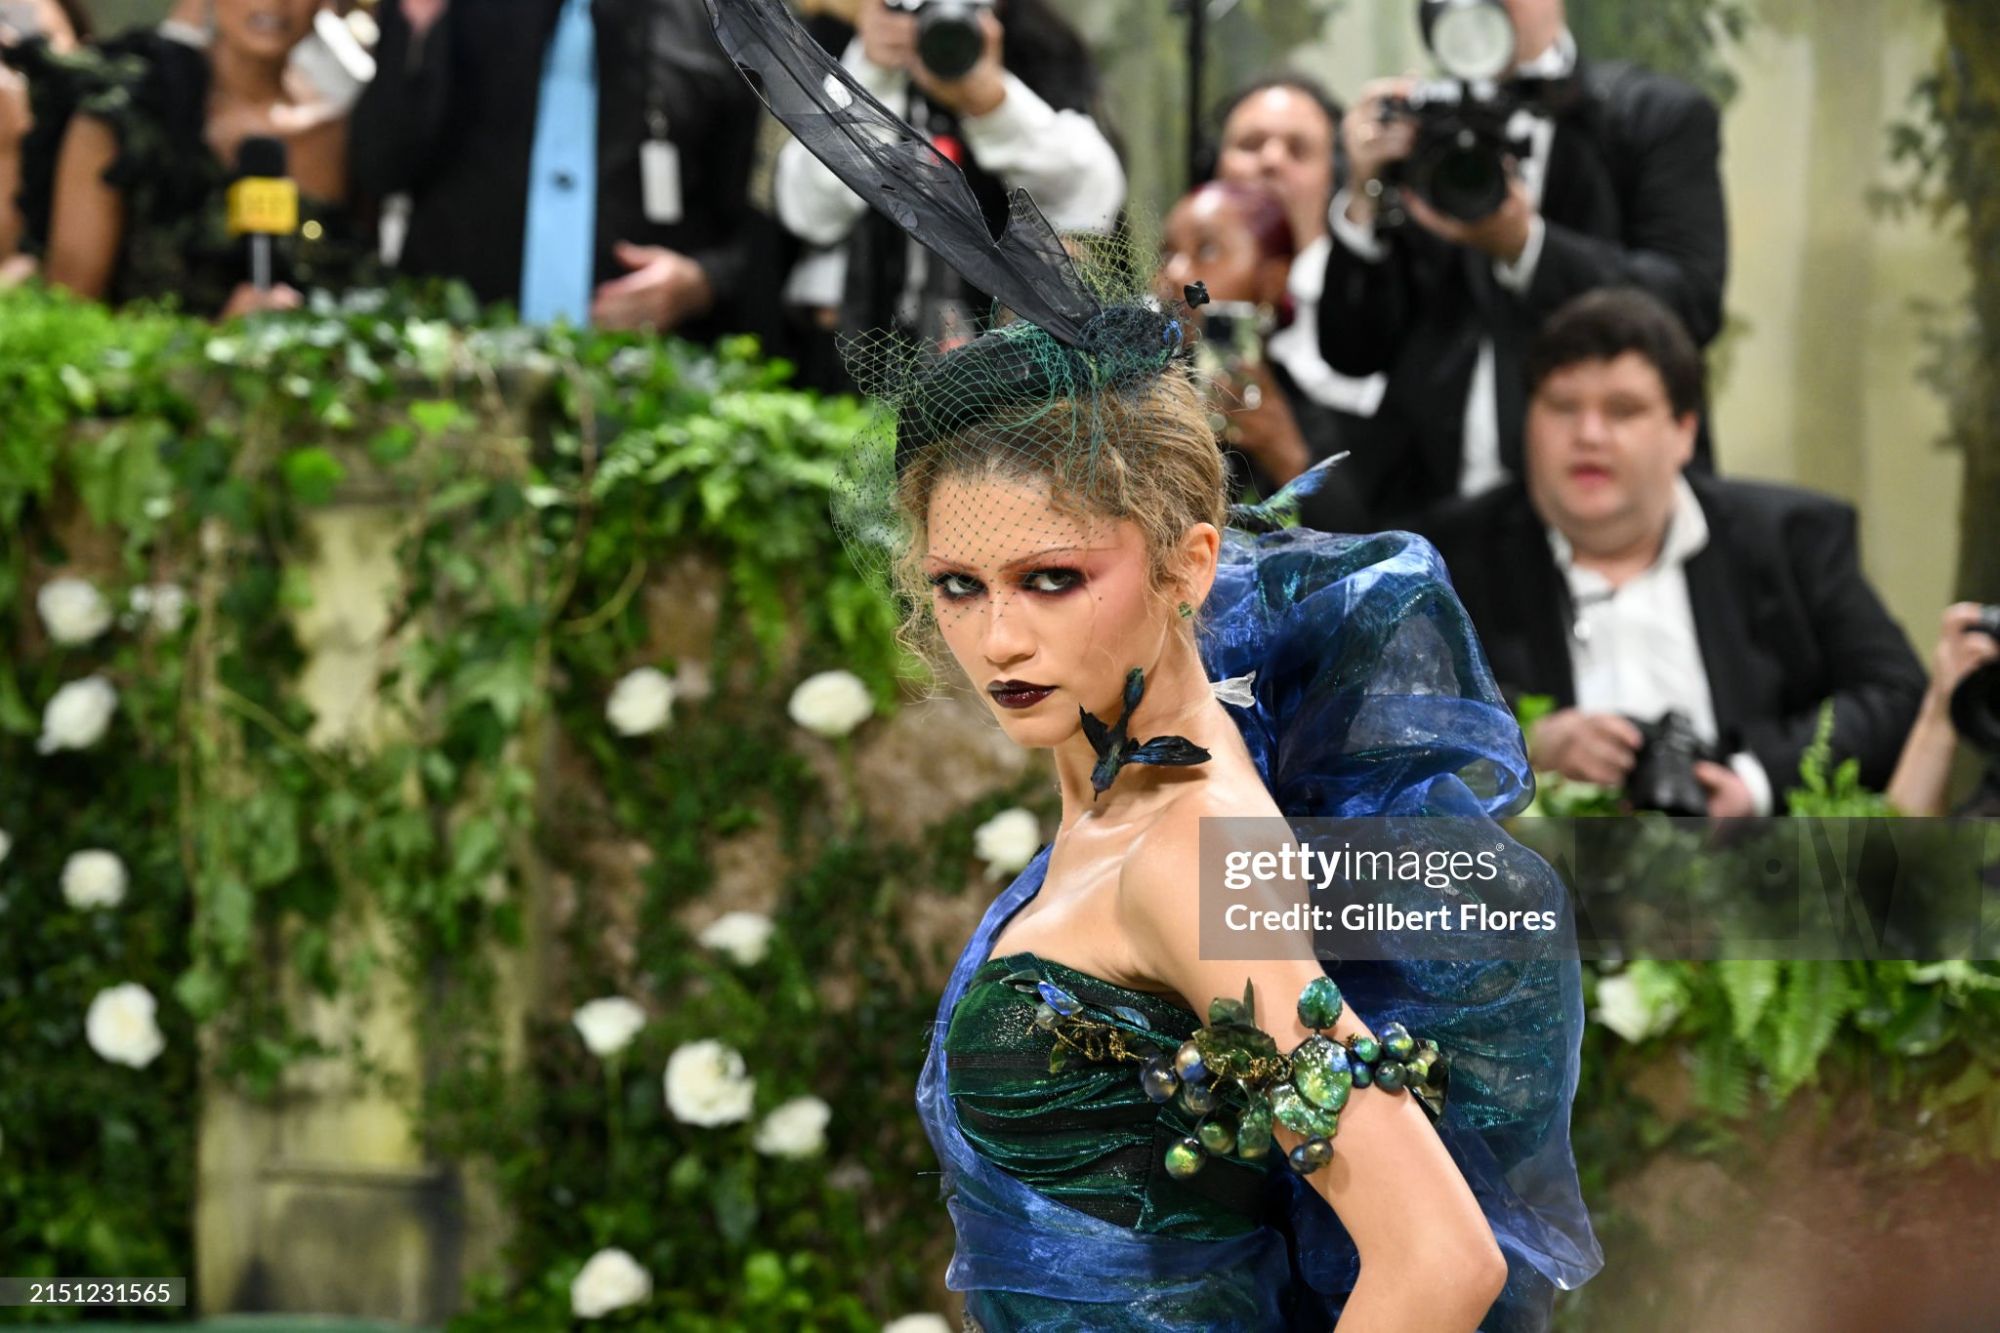 gettyimages-2151231565-2048x2048.jpg